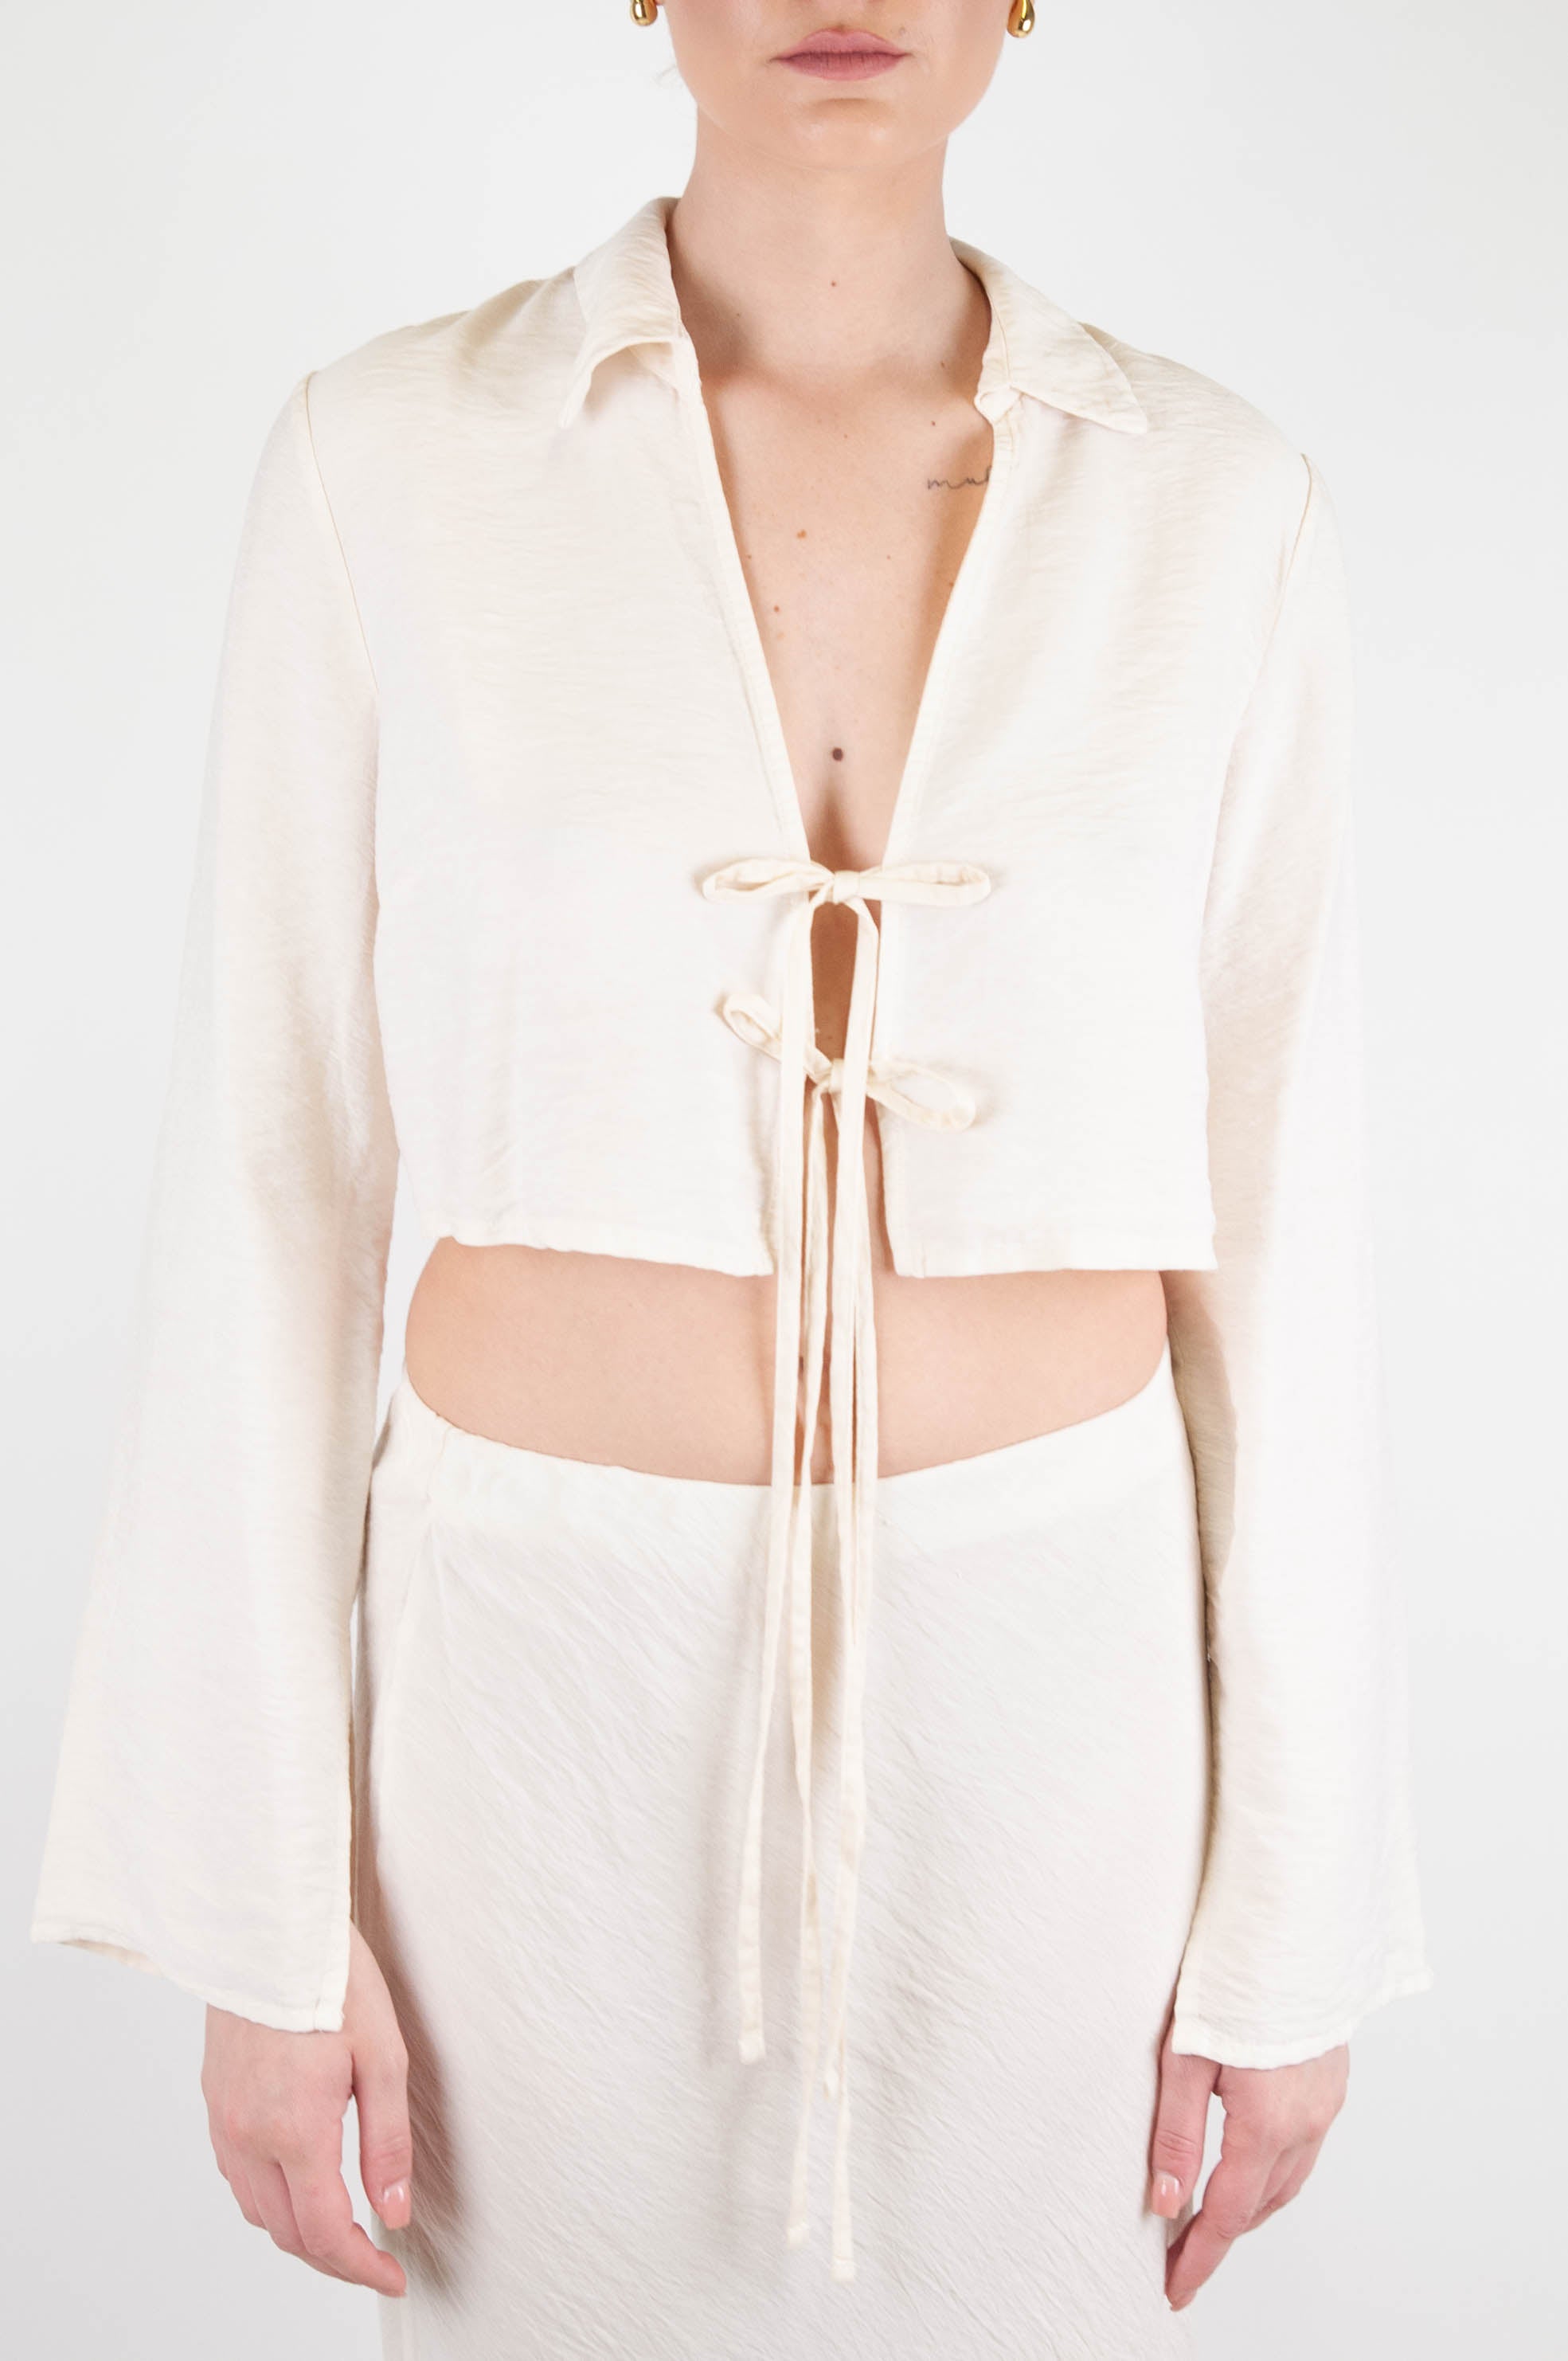 Haveone - Cropped shirt with front-back lace closure